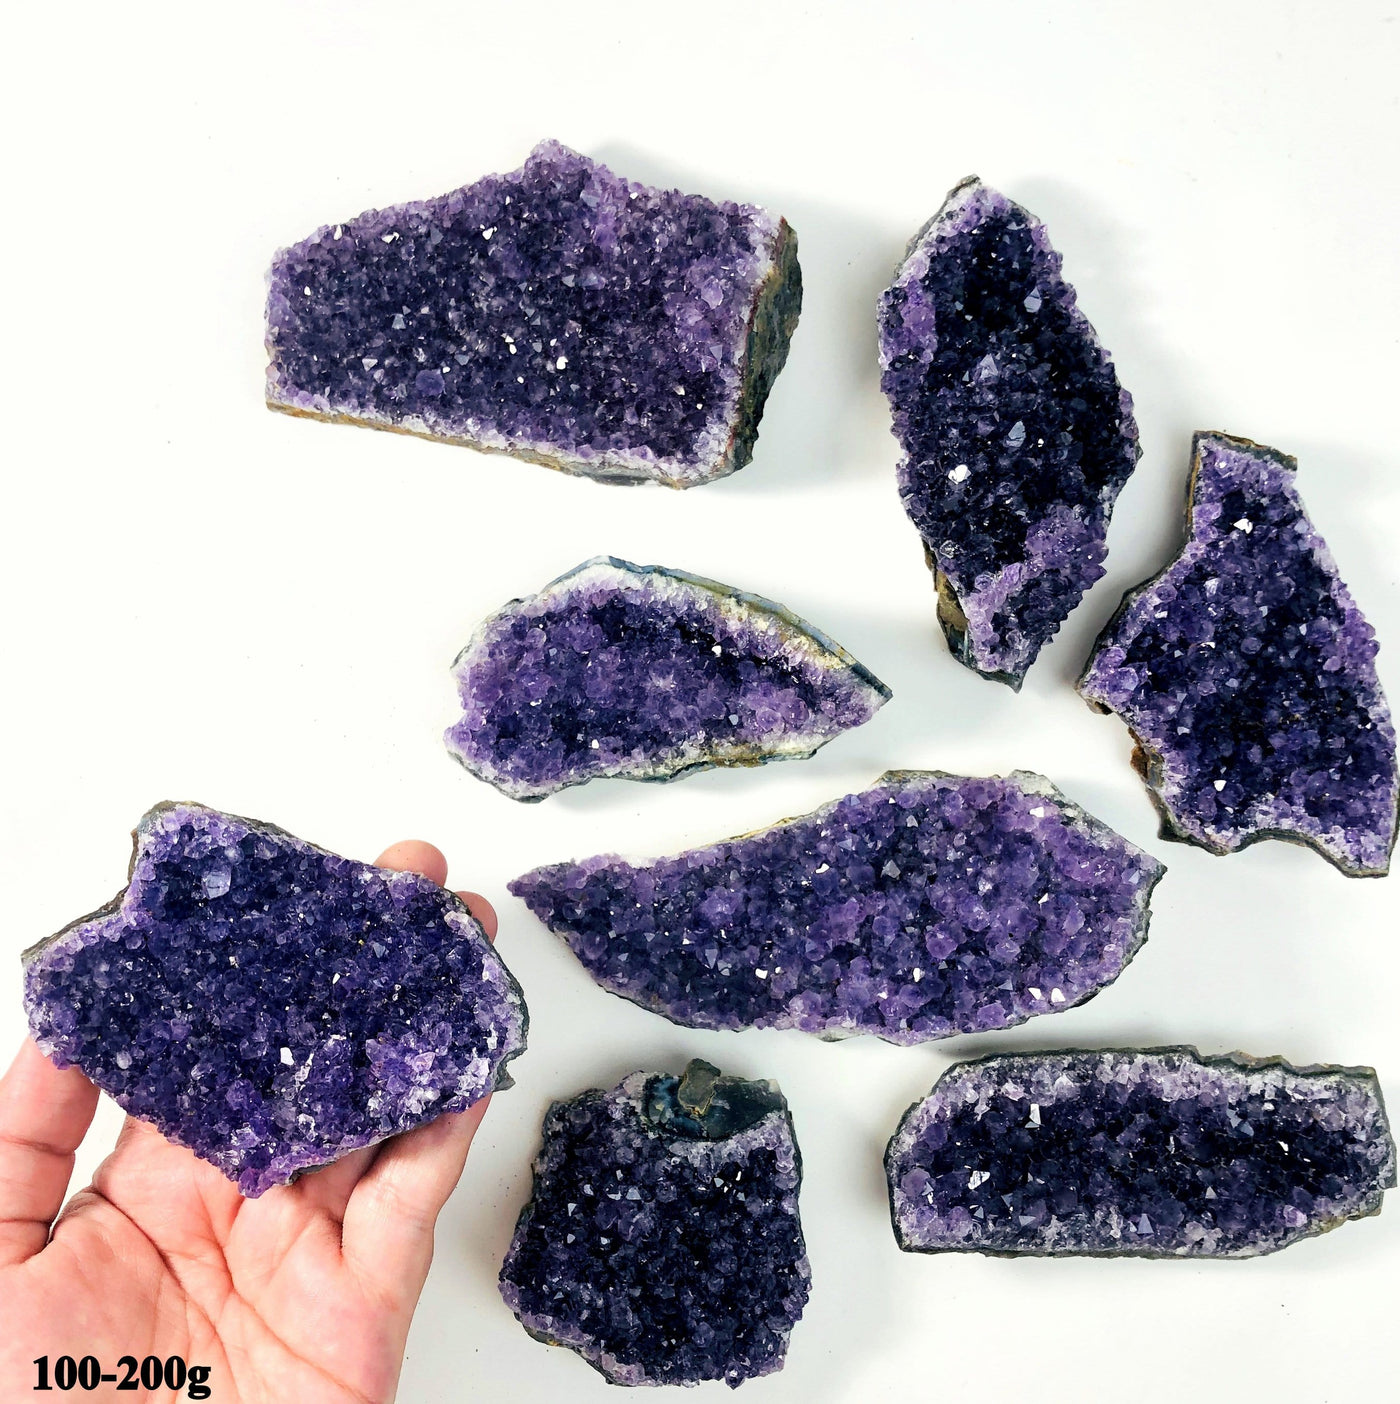 hand holding up amethyst cluster with others in the background